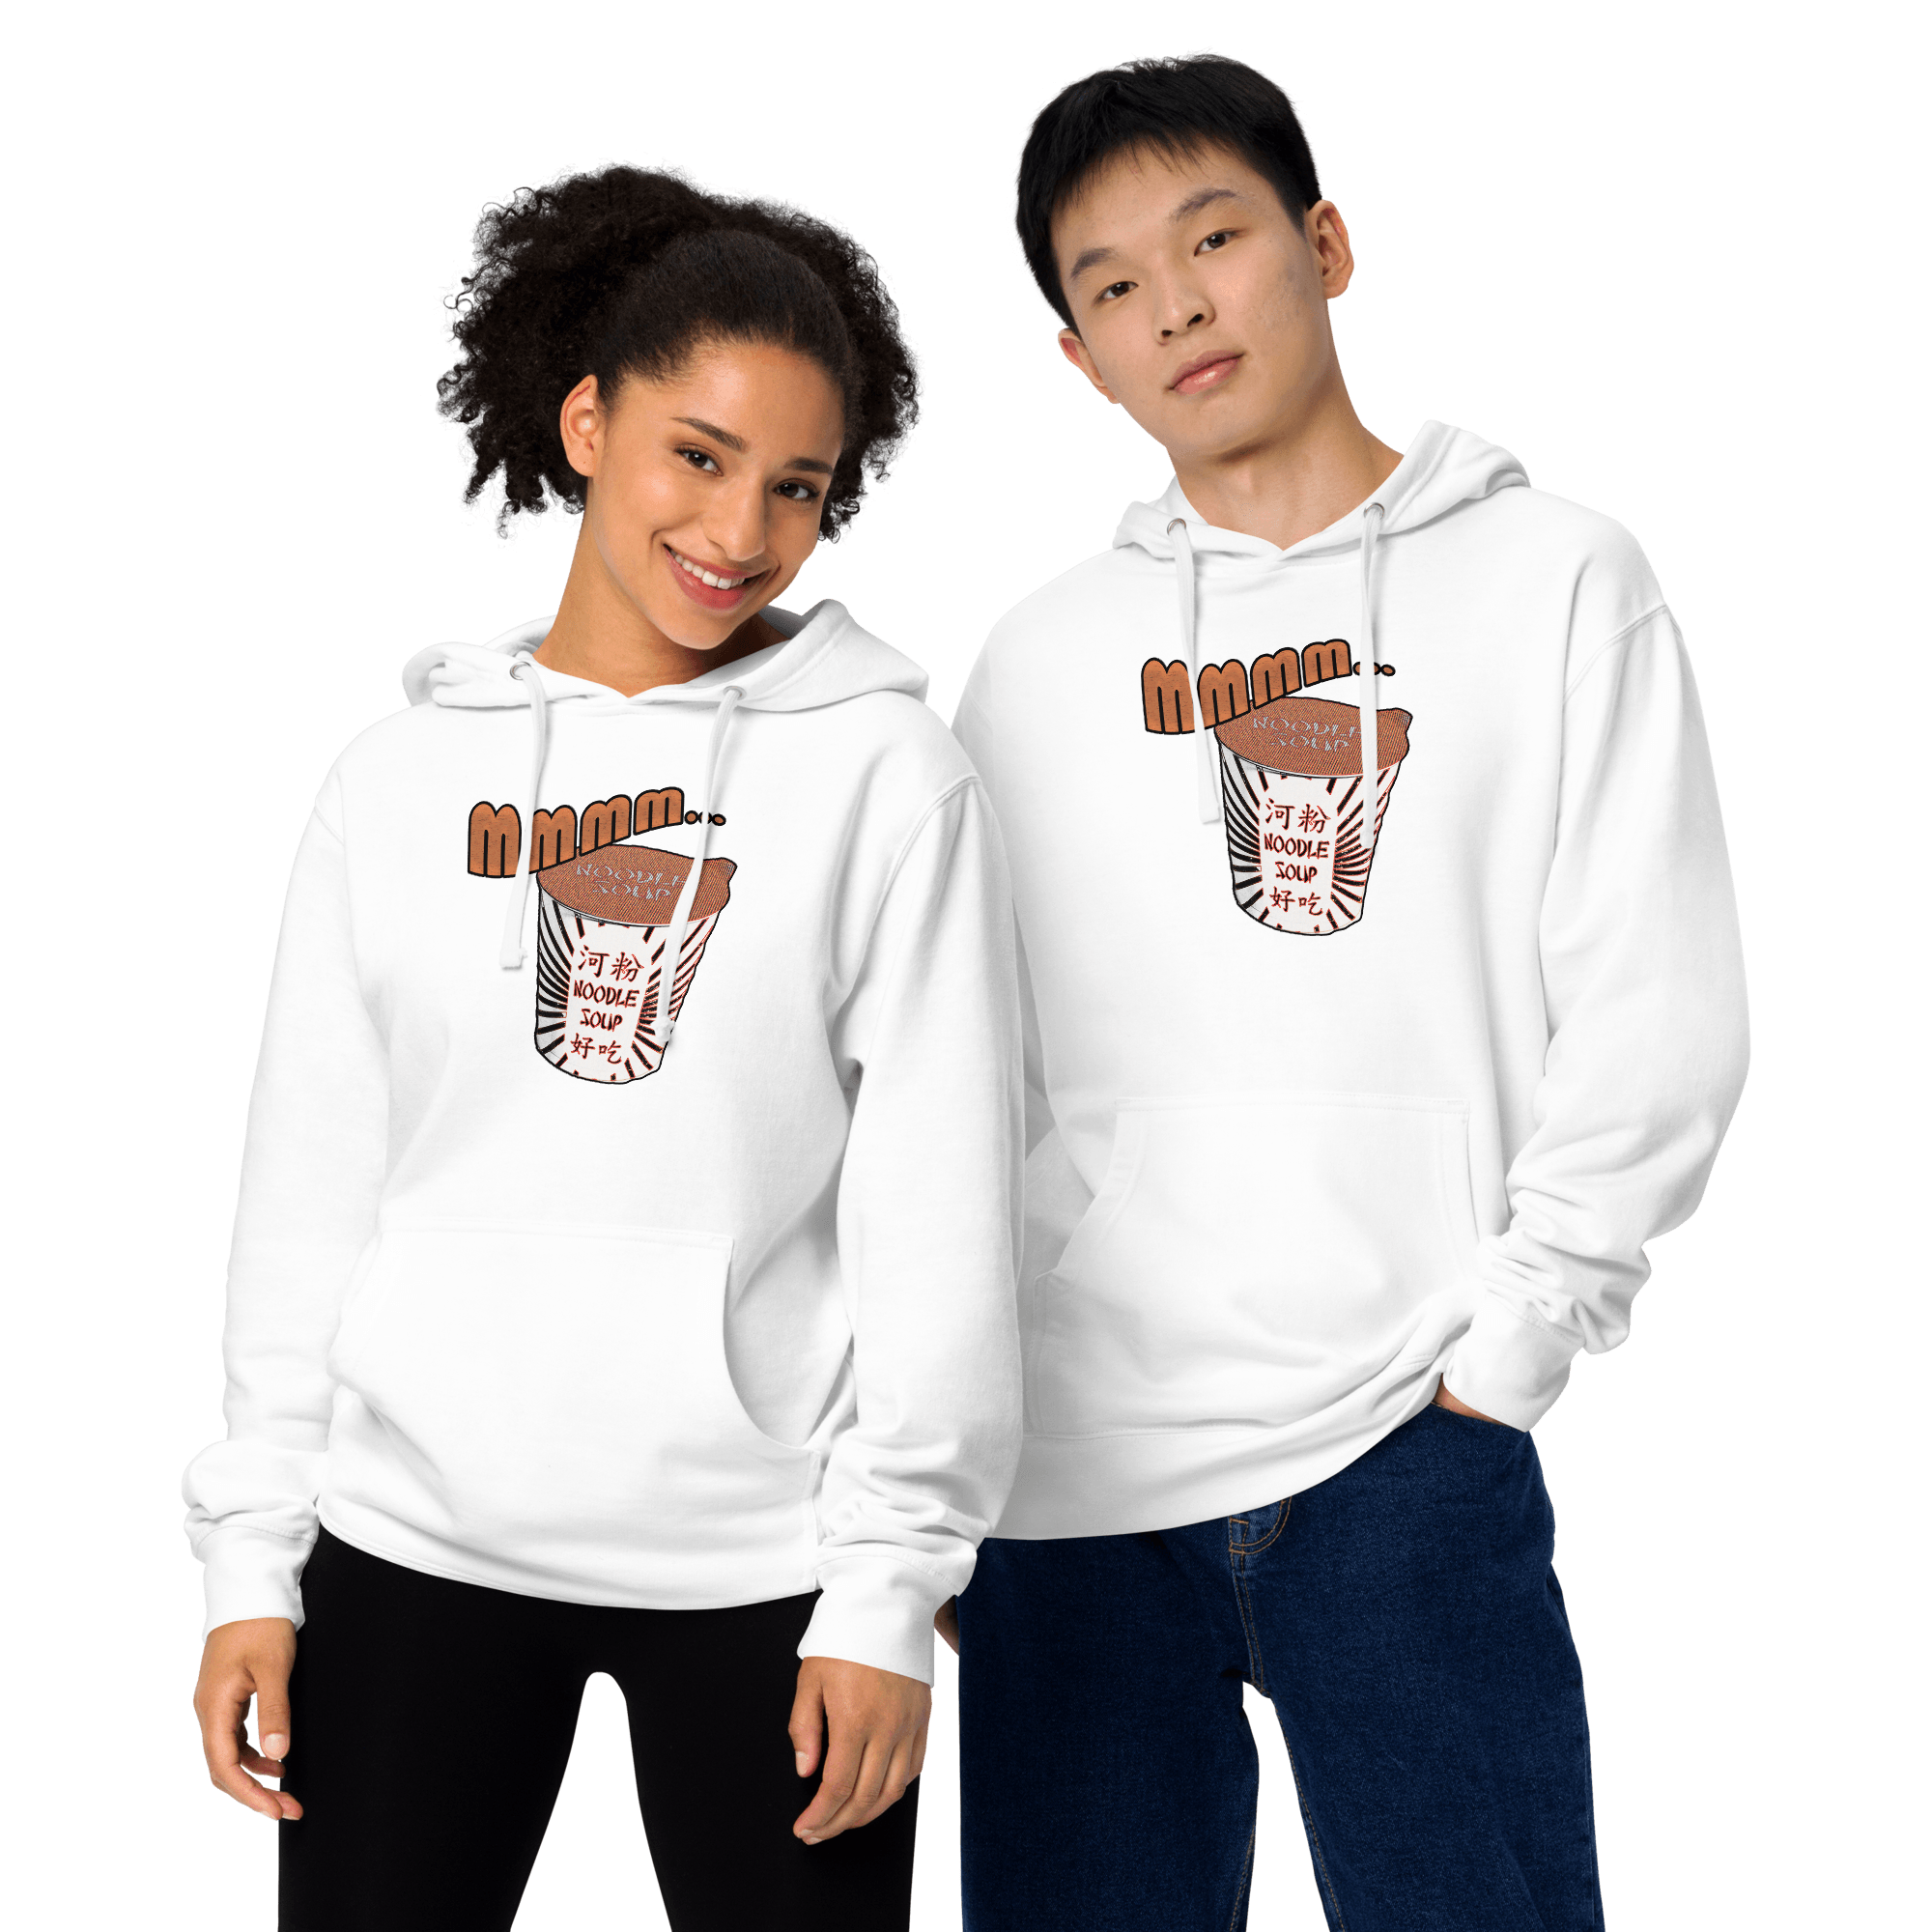 Mmm, Noodle Soup Unisex midweight hoodie VAWDesigns